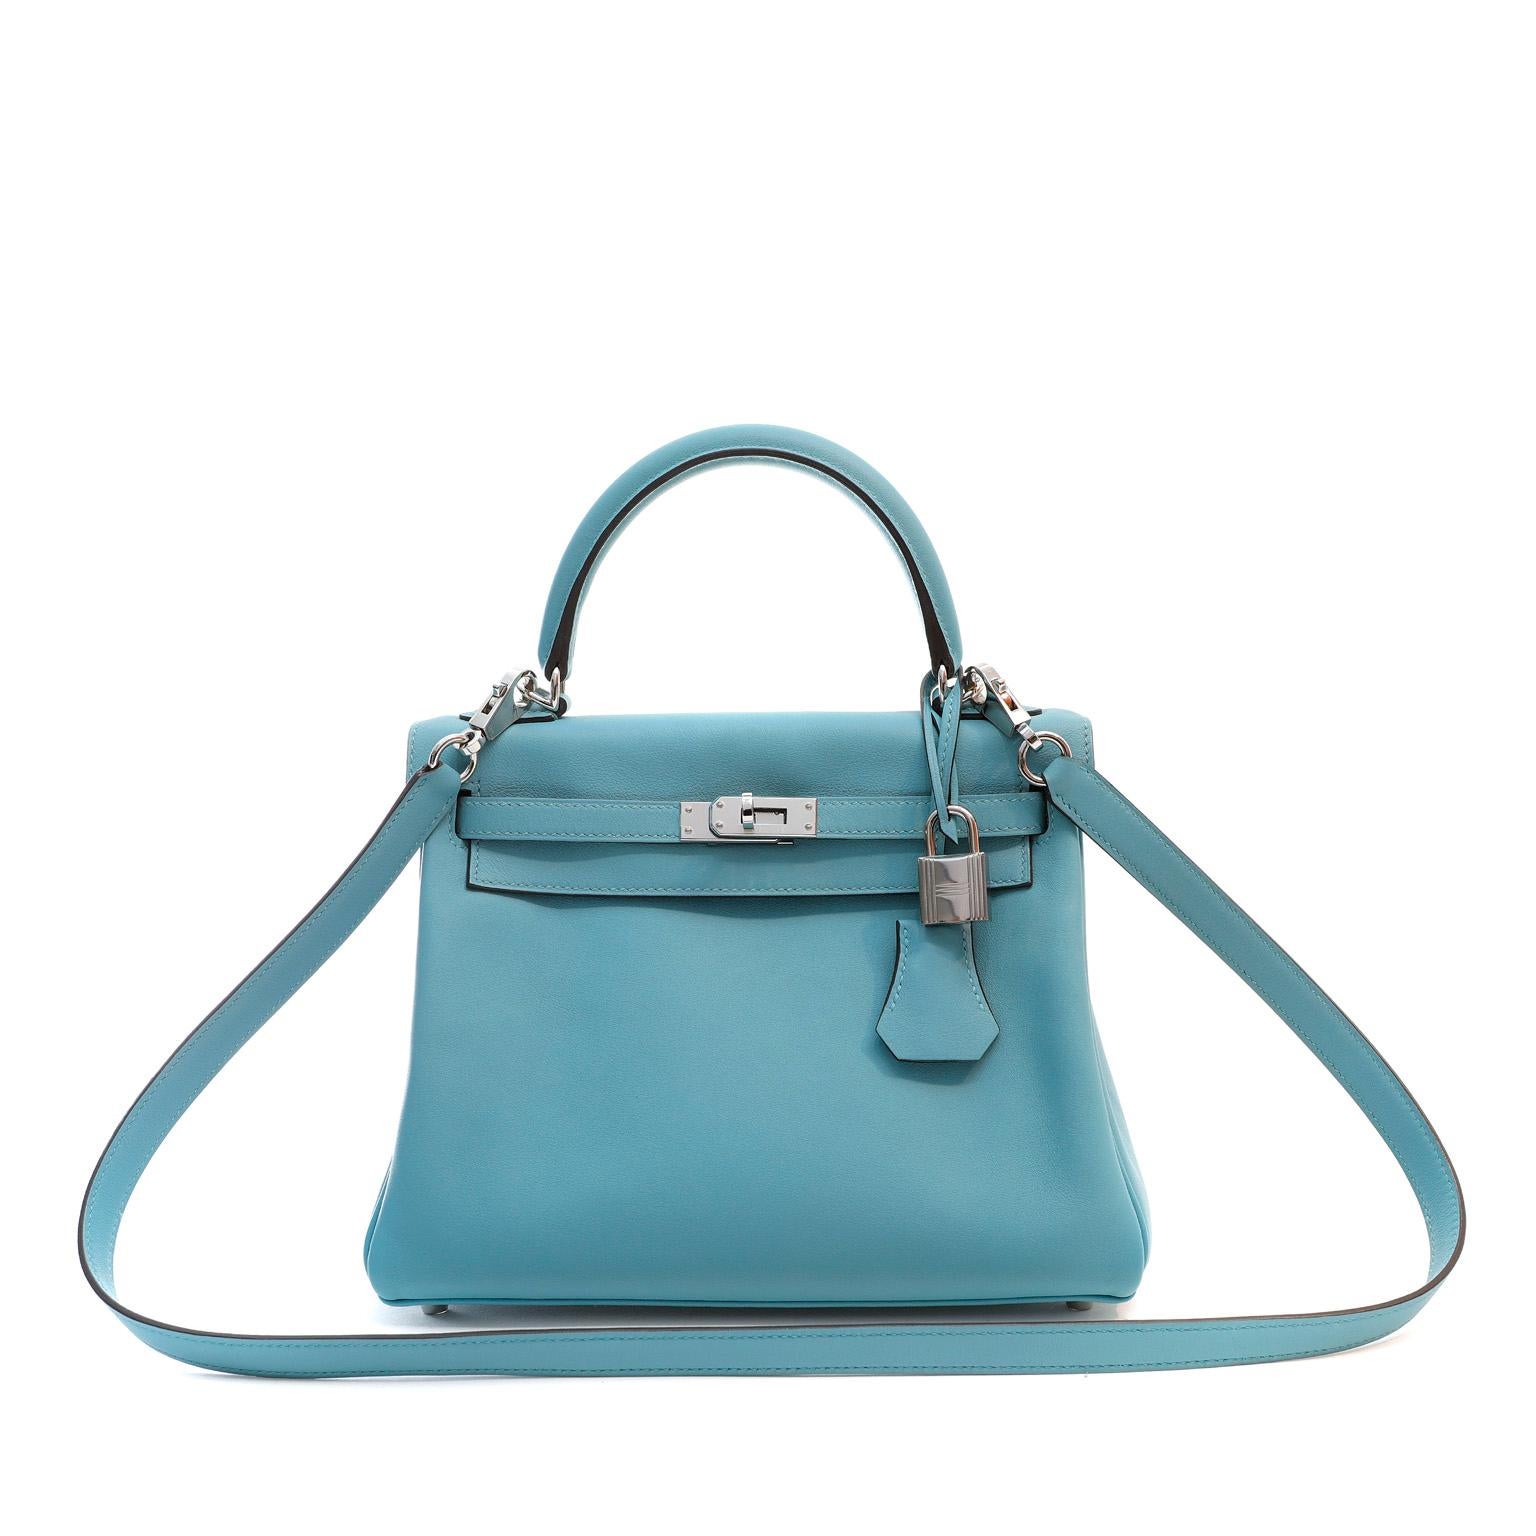 This authentic Hermès Ocean Blue Swift Leather 25 cm Kelly is in pristine unworn condition with the protective plastic intact on the hardware.

Long waitlists are commonplace for the intensely coveted iconic Kelly.  Each piece is hand crafted by